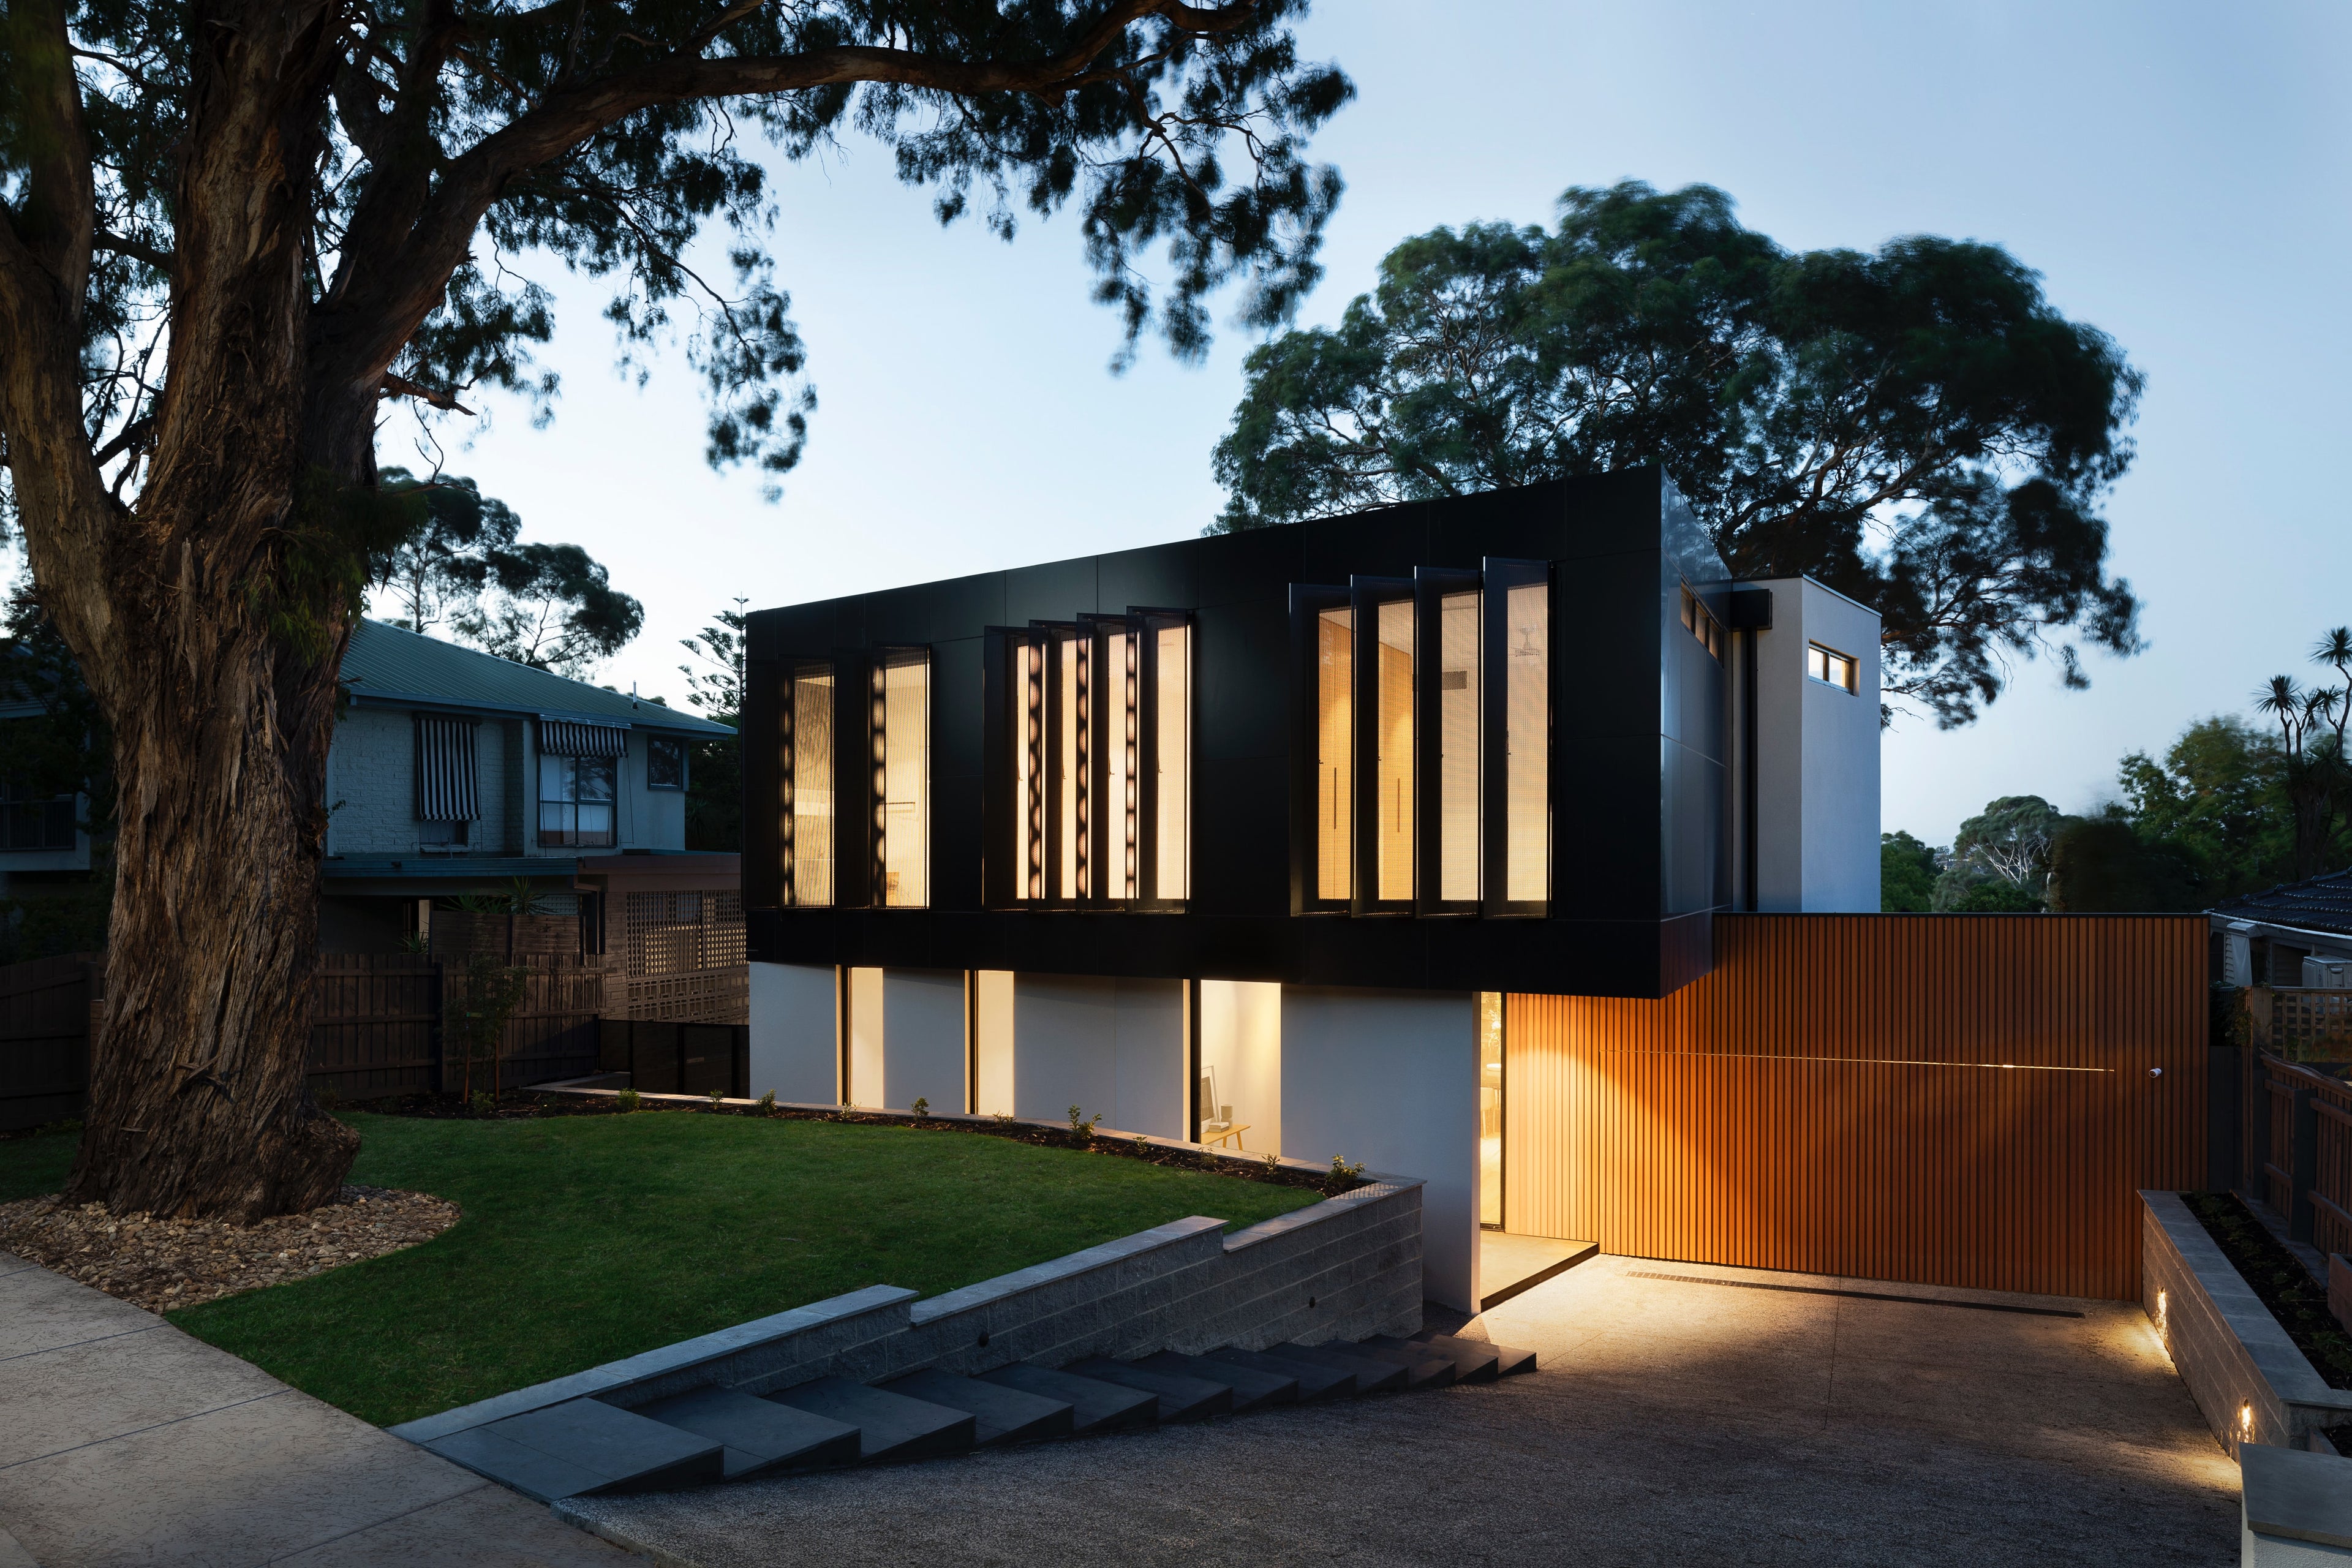 A modern house at dusk with illuminated windows and a wooden gate.